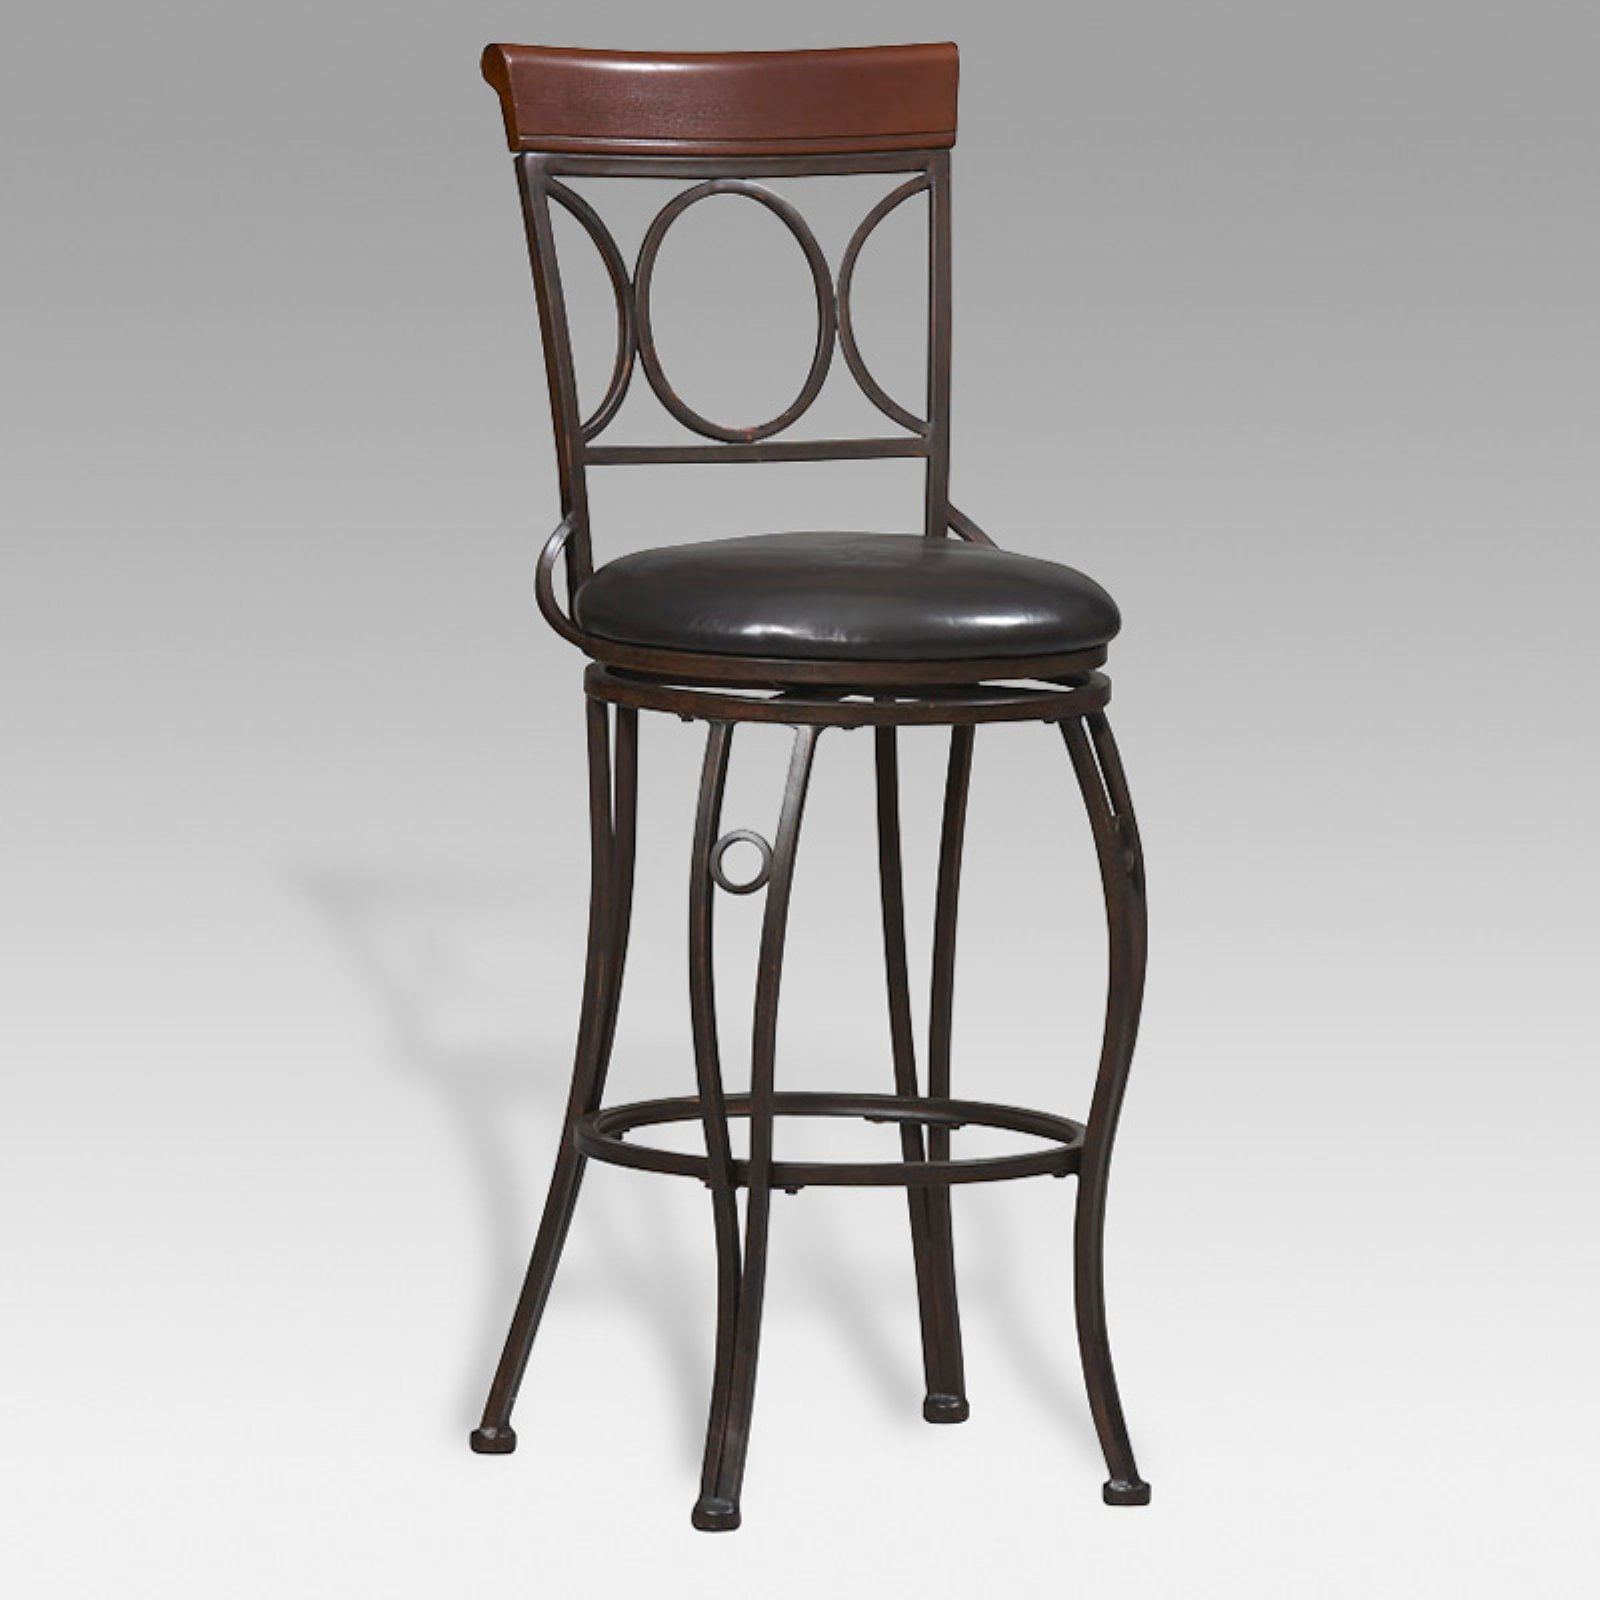 Featured image of post Linon Home Decor Bar Stool With Back The cushion is piled high for extra comfort making this stool